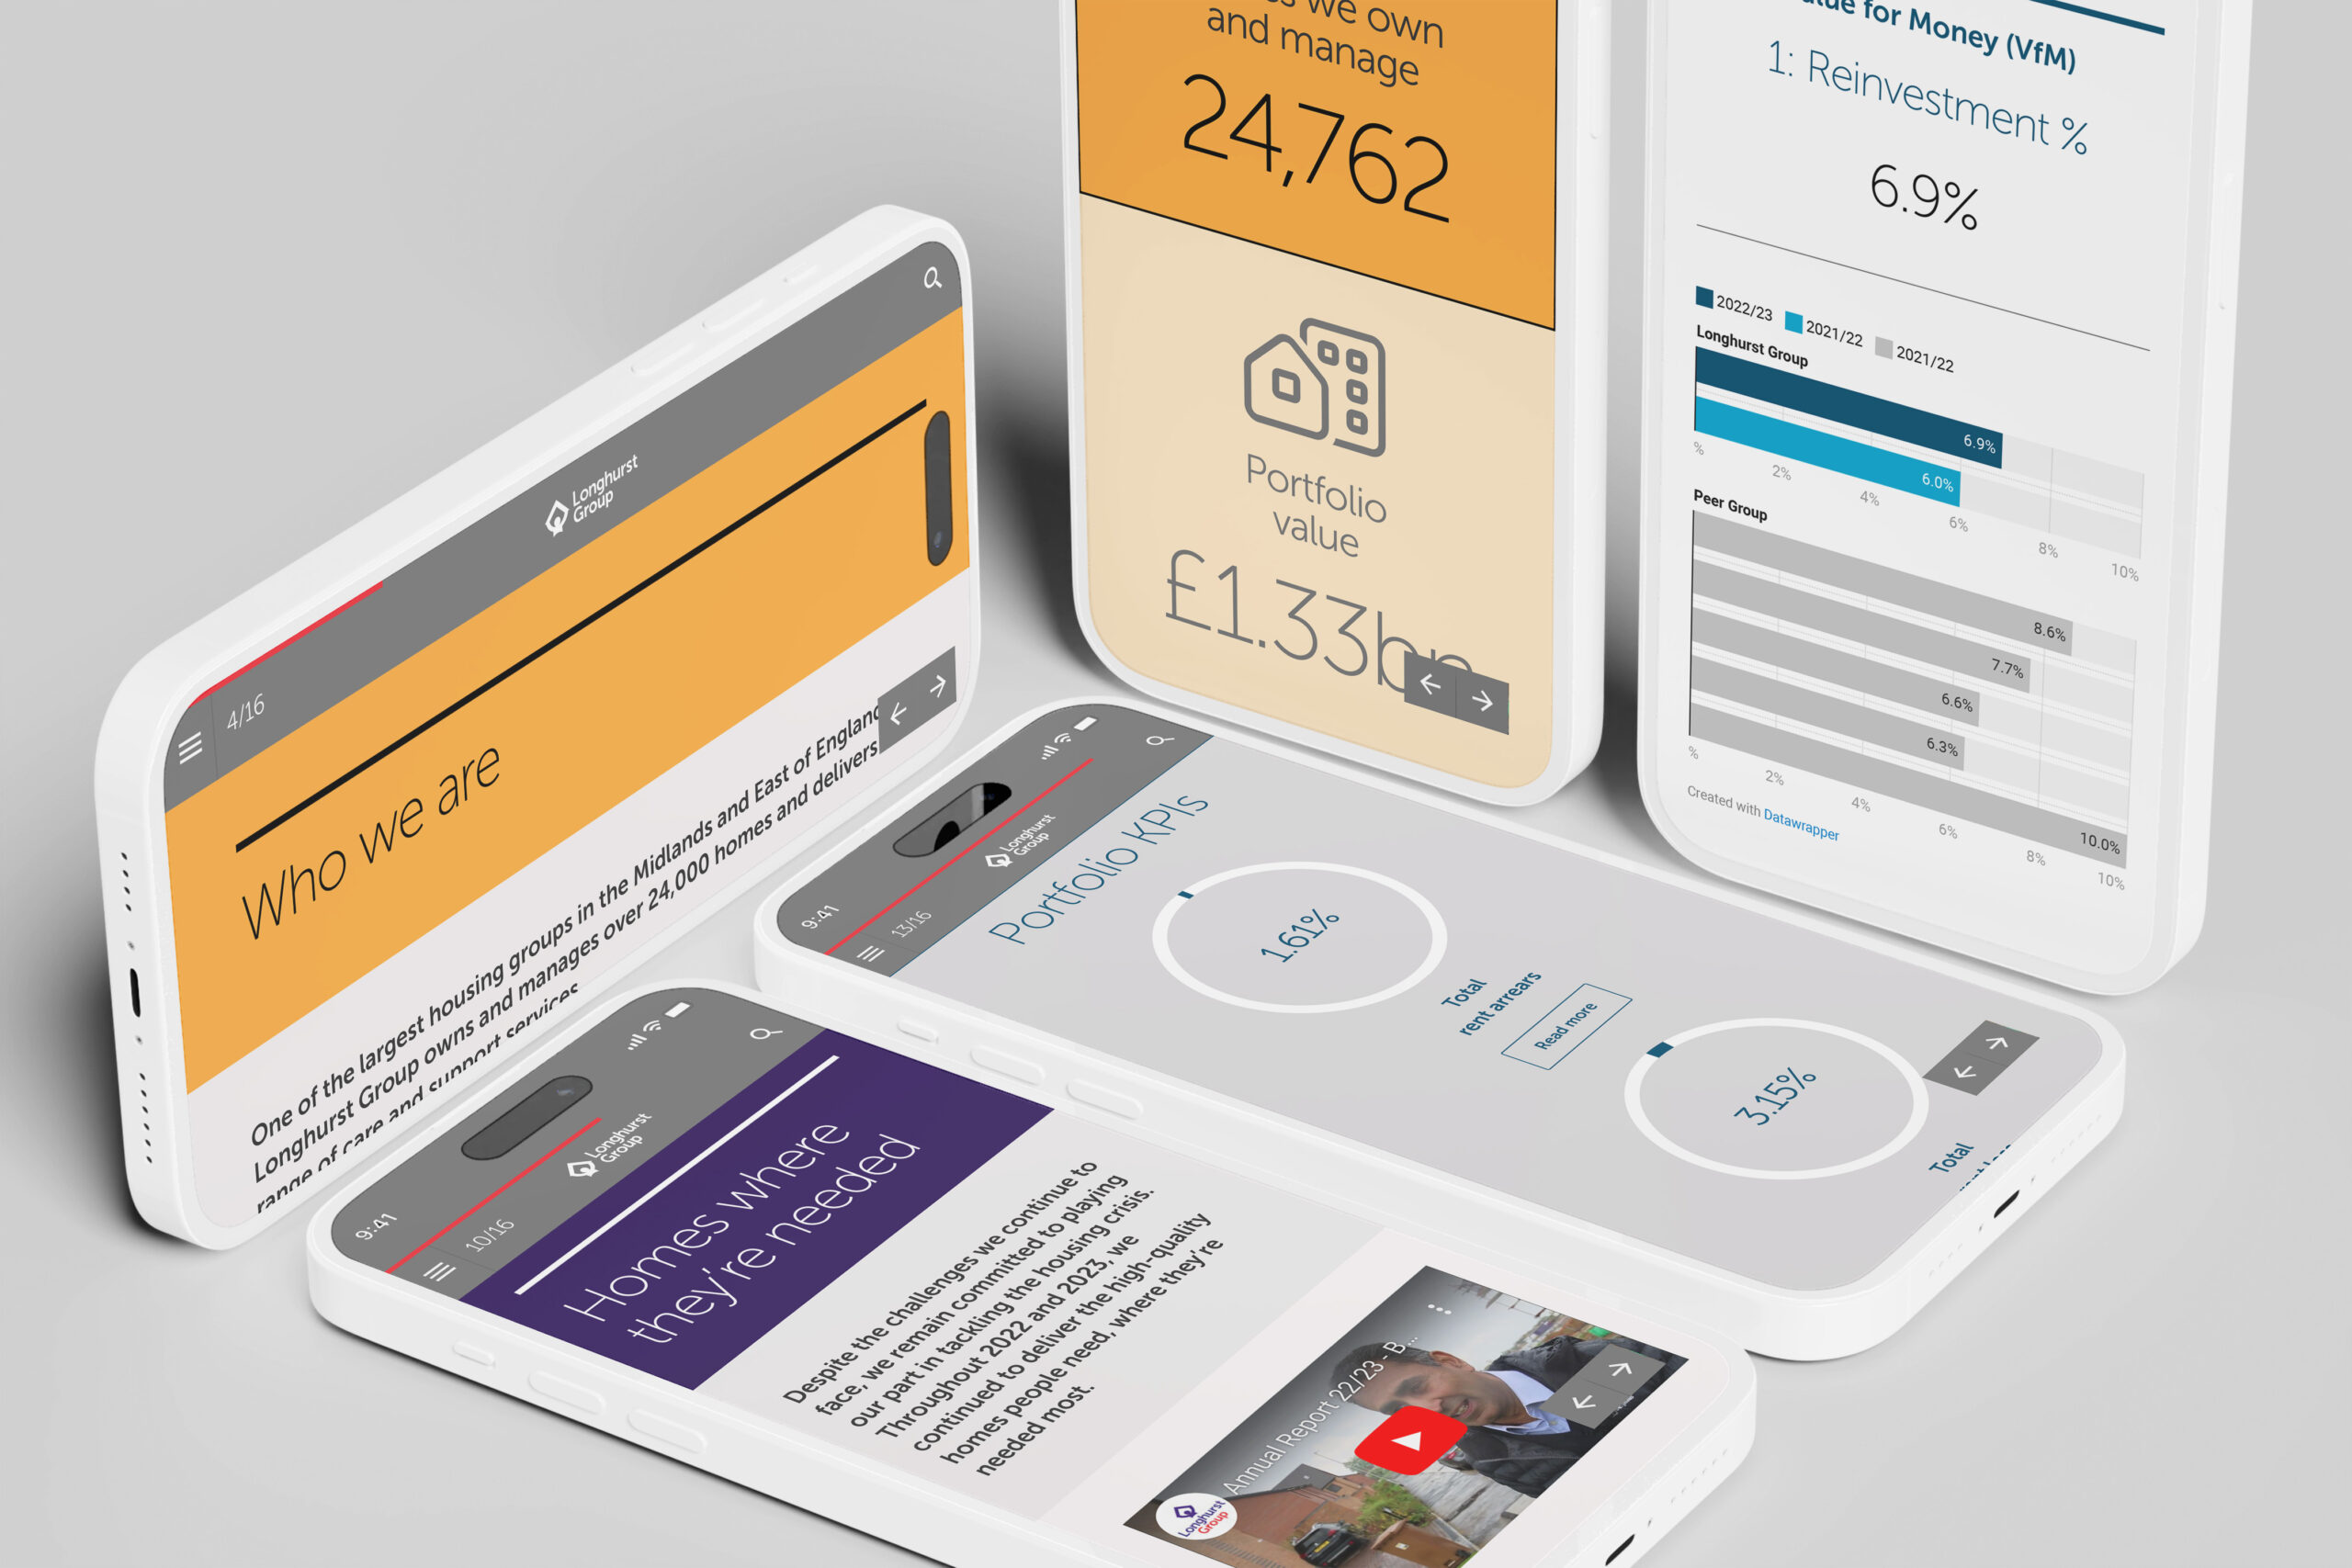 A selection of smartphones are arranged on a grey surface displaying various pages from Longhurst Group's 2022/23 Annual Report